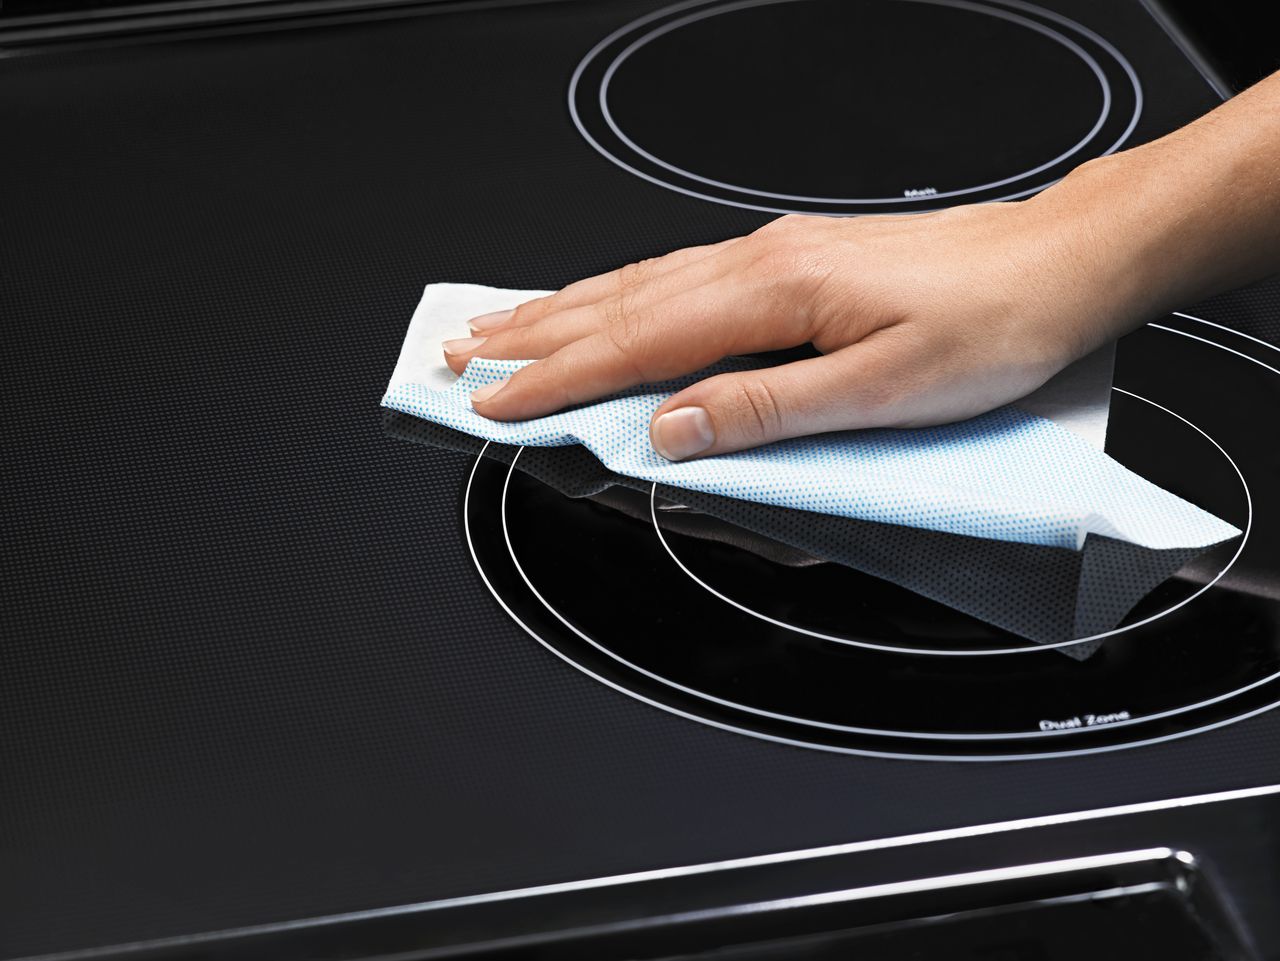 Cleaning cooktop without scratching